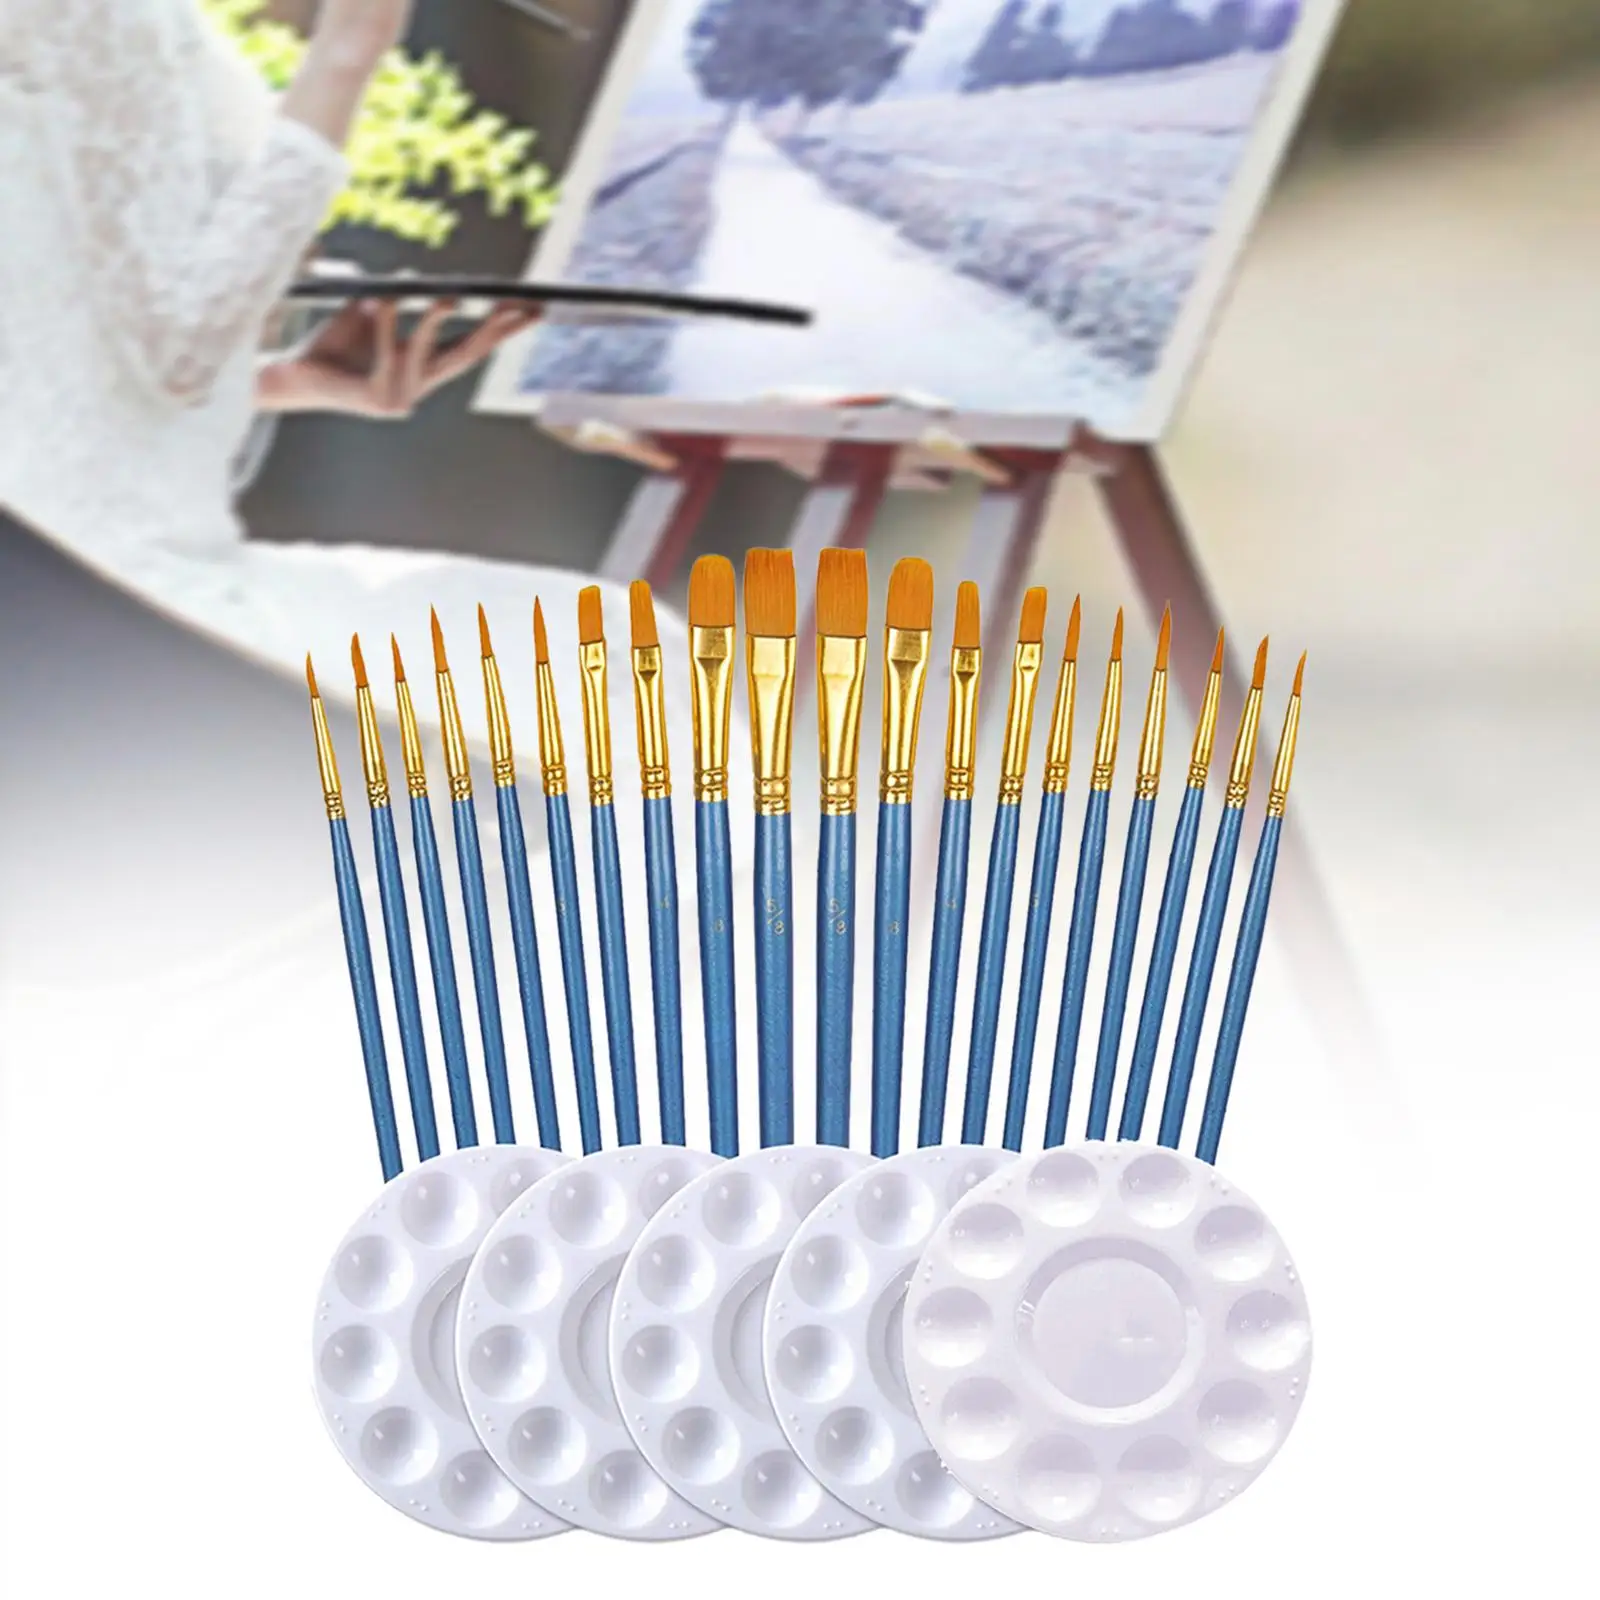 25x Paint Brushes Palette Set Acrylic Watercolor Oil Painting Tool Writing